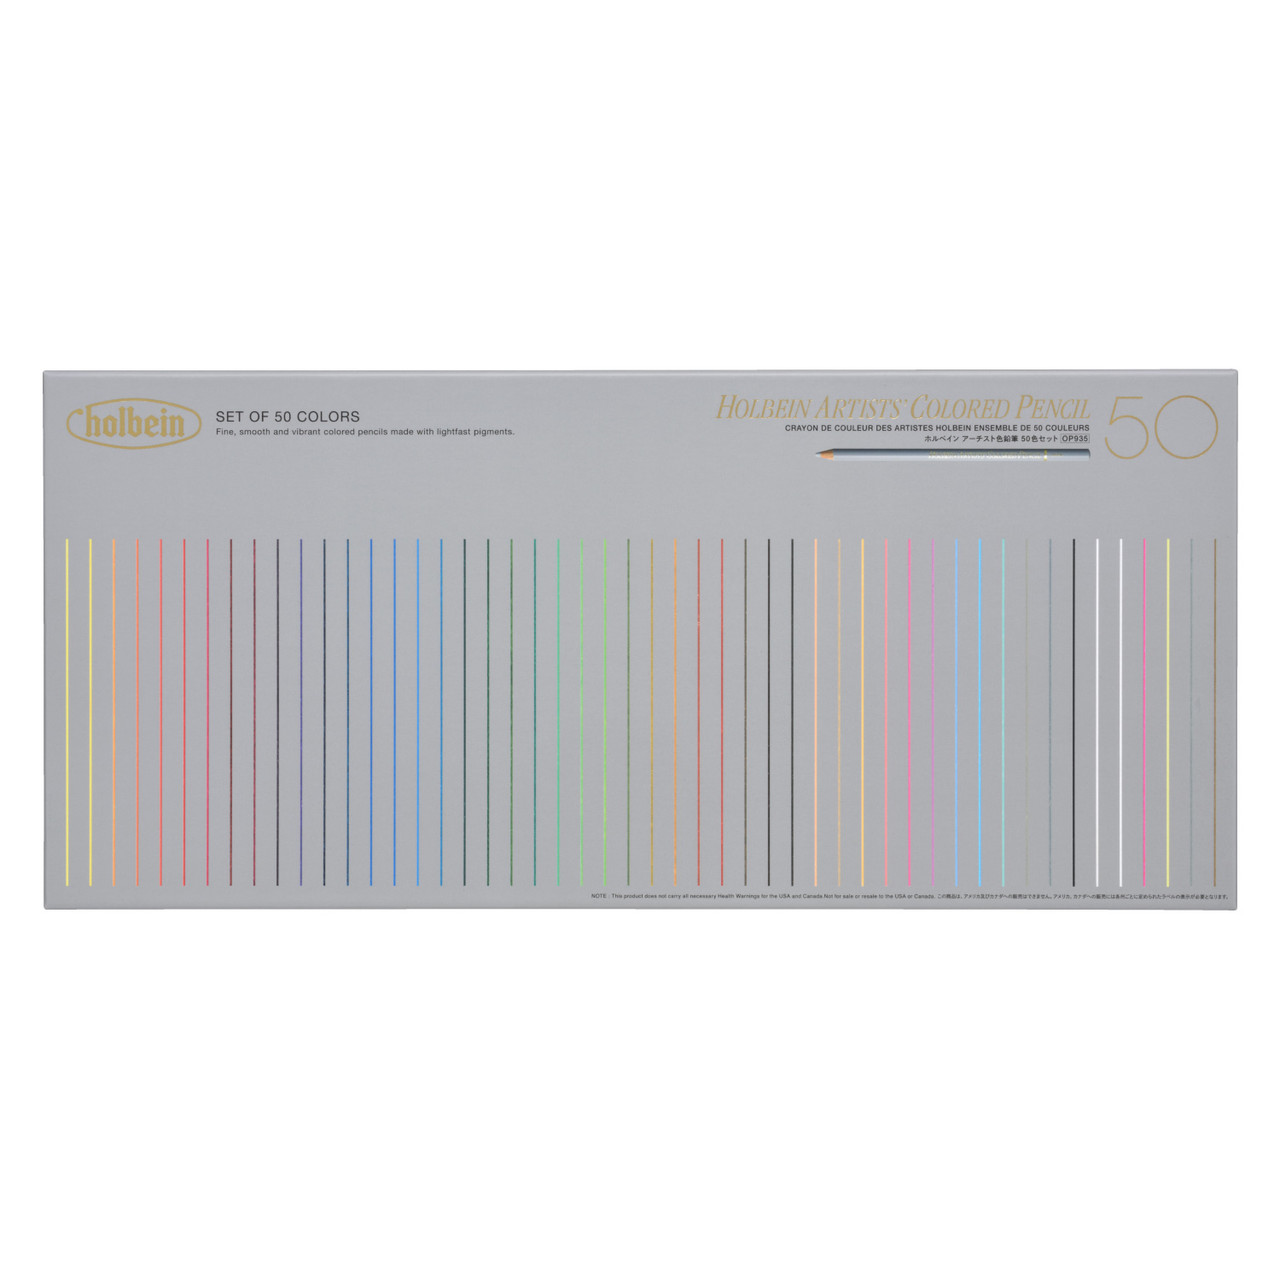 Holbein Artists' Colored Pencil Basic Tone Set of 12